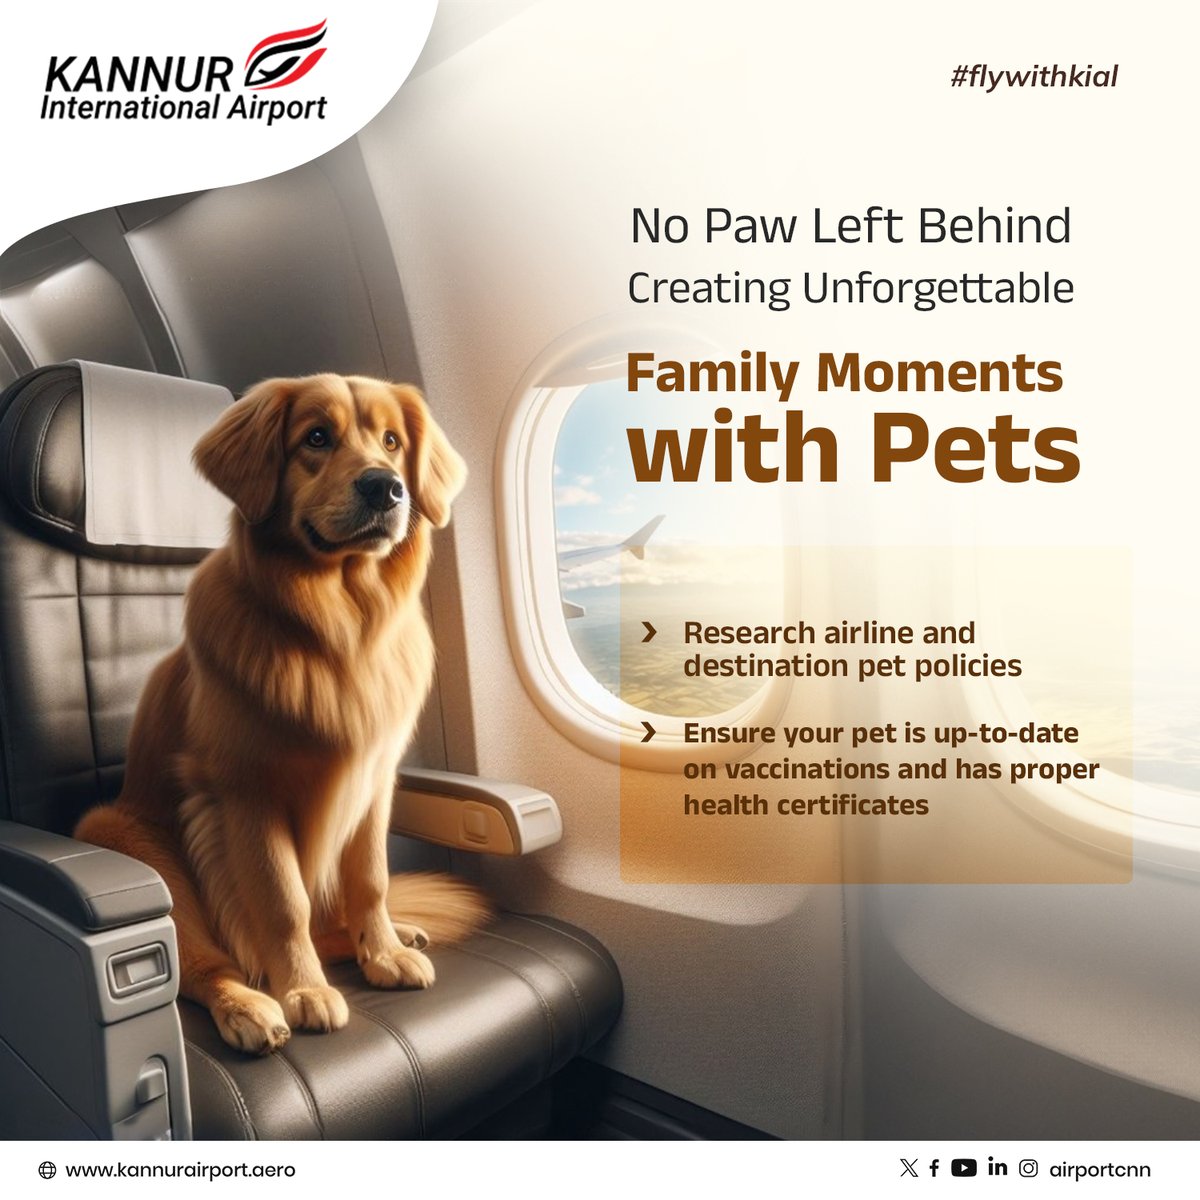 Sit back, relax, and enjoy the journey with your furry co-pilot by your side

#kannurinternationalairport #kial #traveltip #flywithkial #travelwithpets #petlove